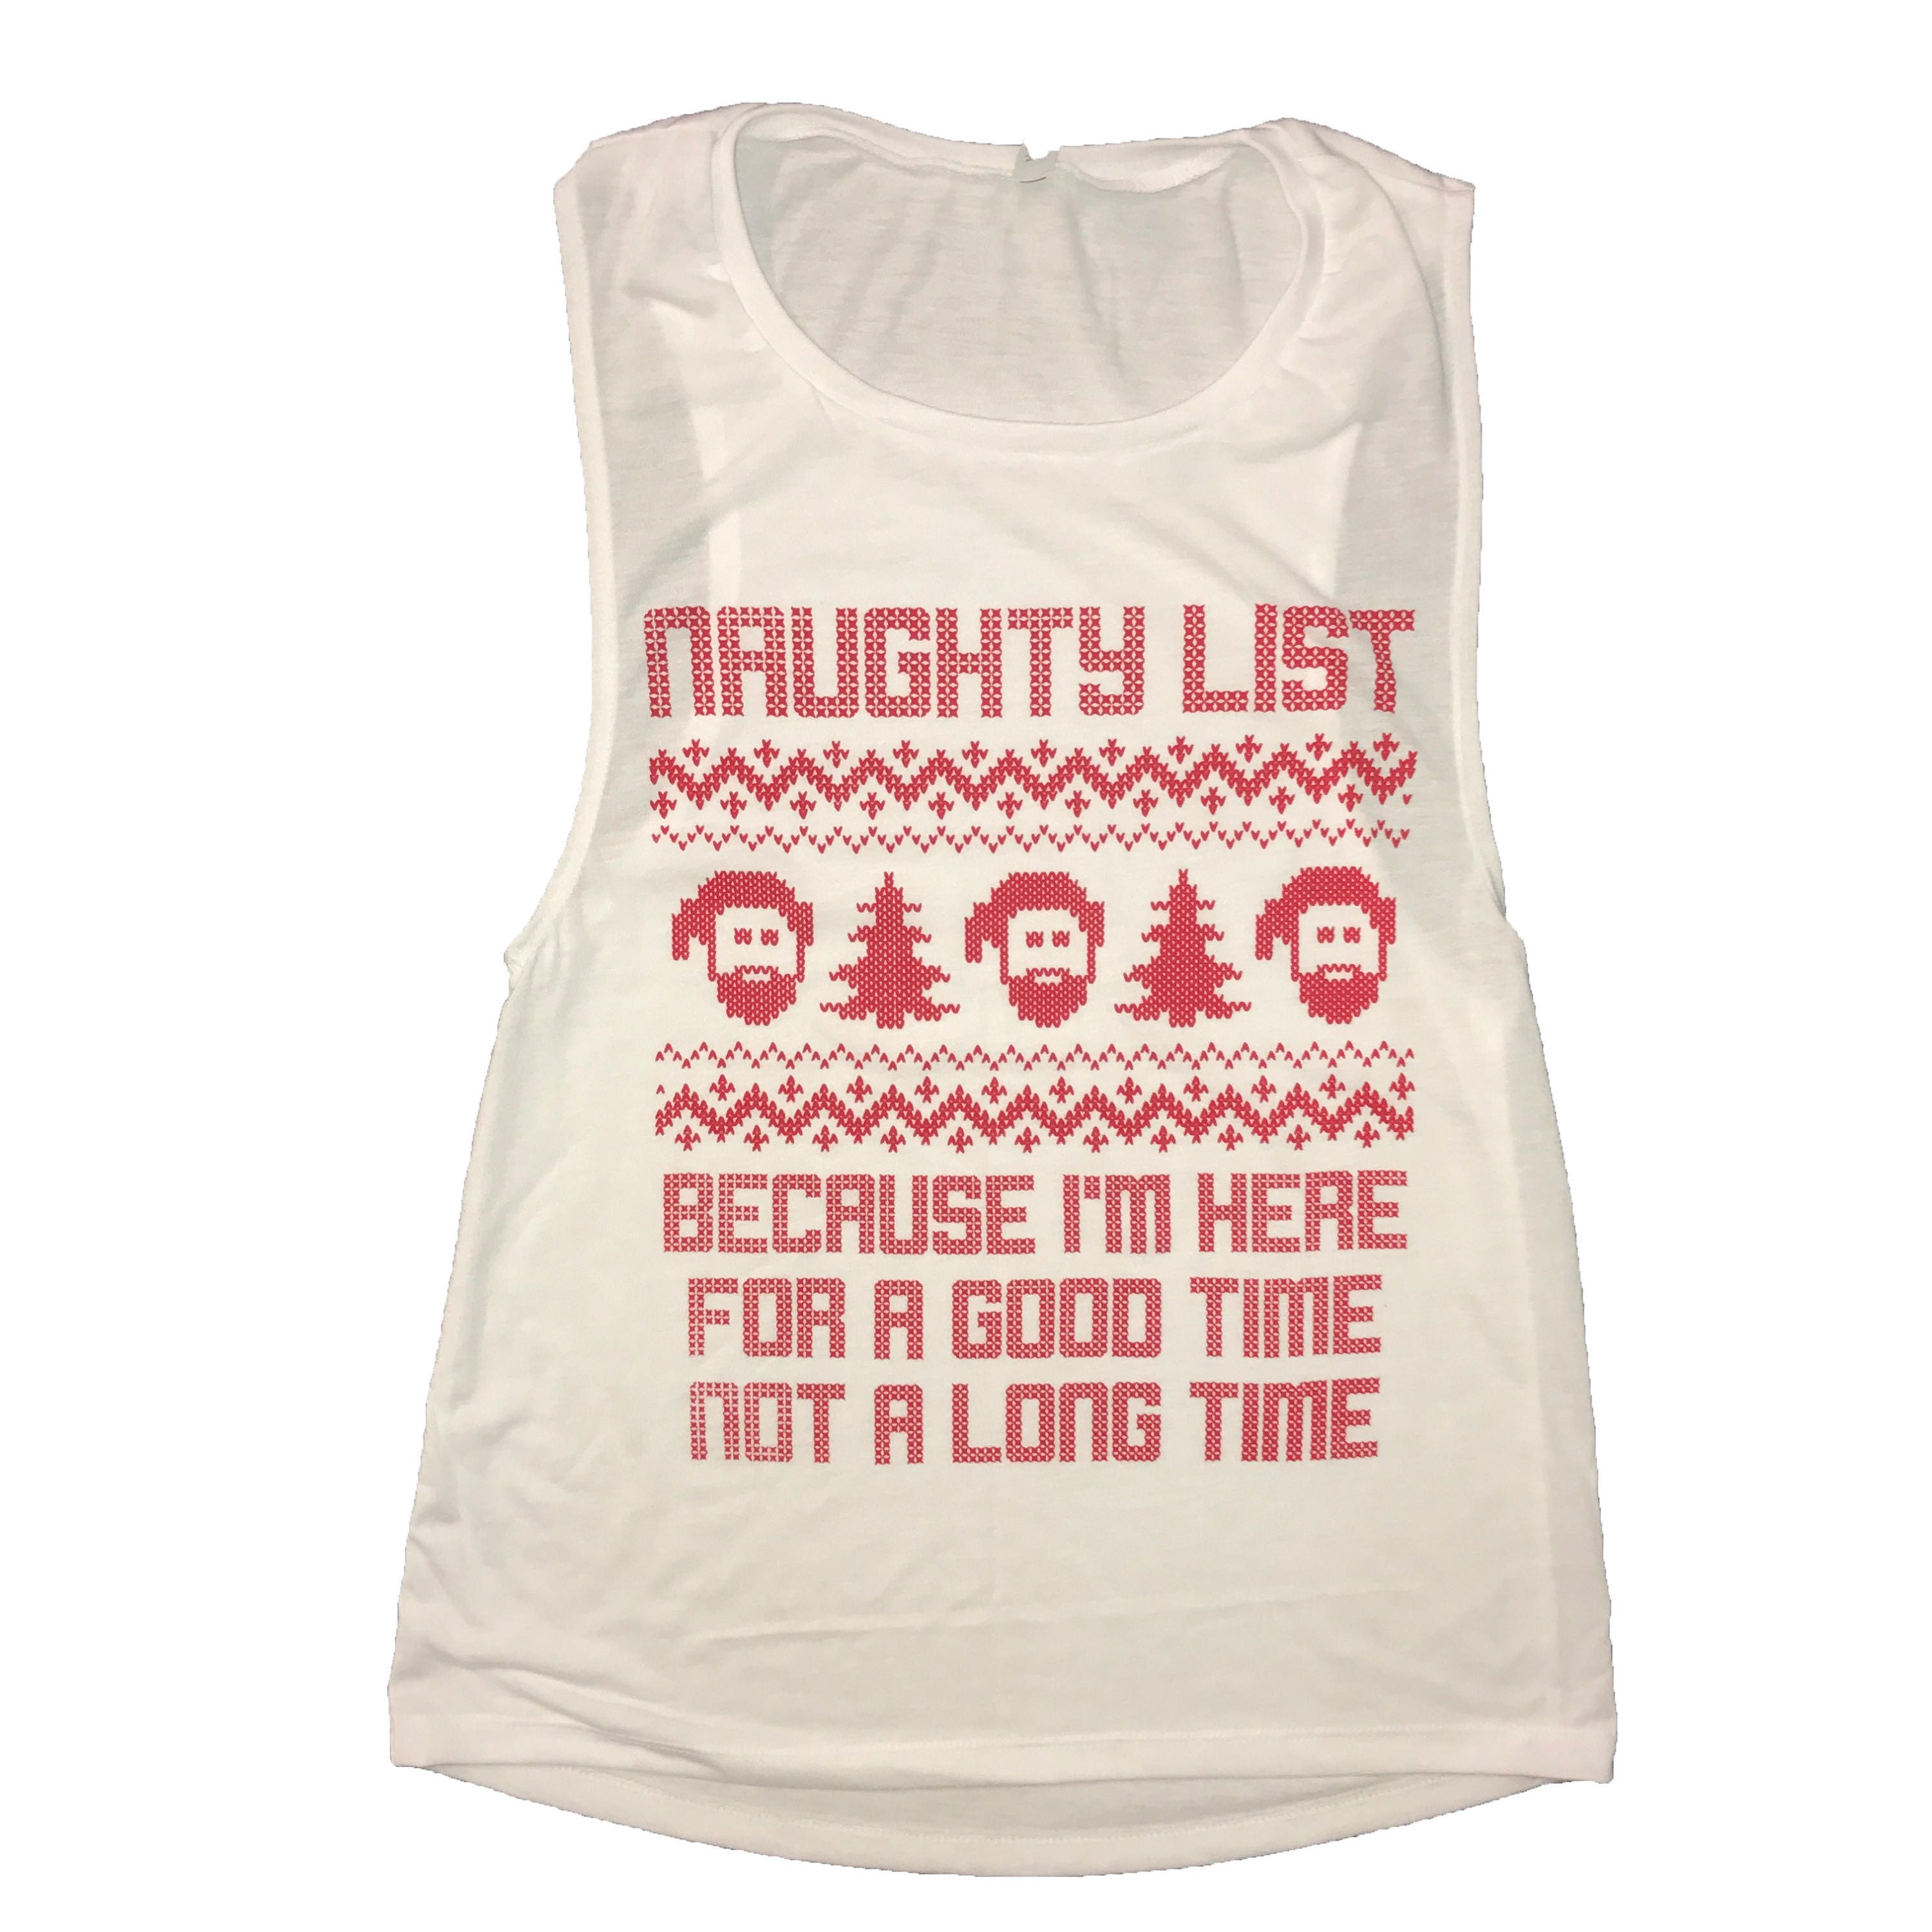 I'm On The Naughty List Because I Wine Too Much Xmas Women Tank